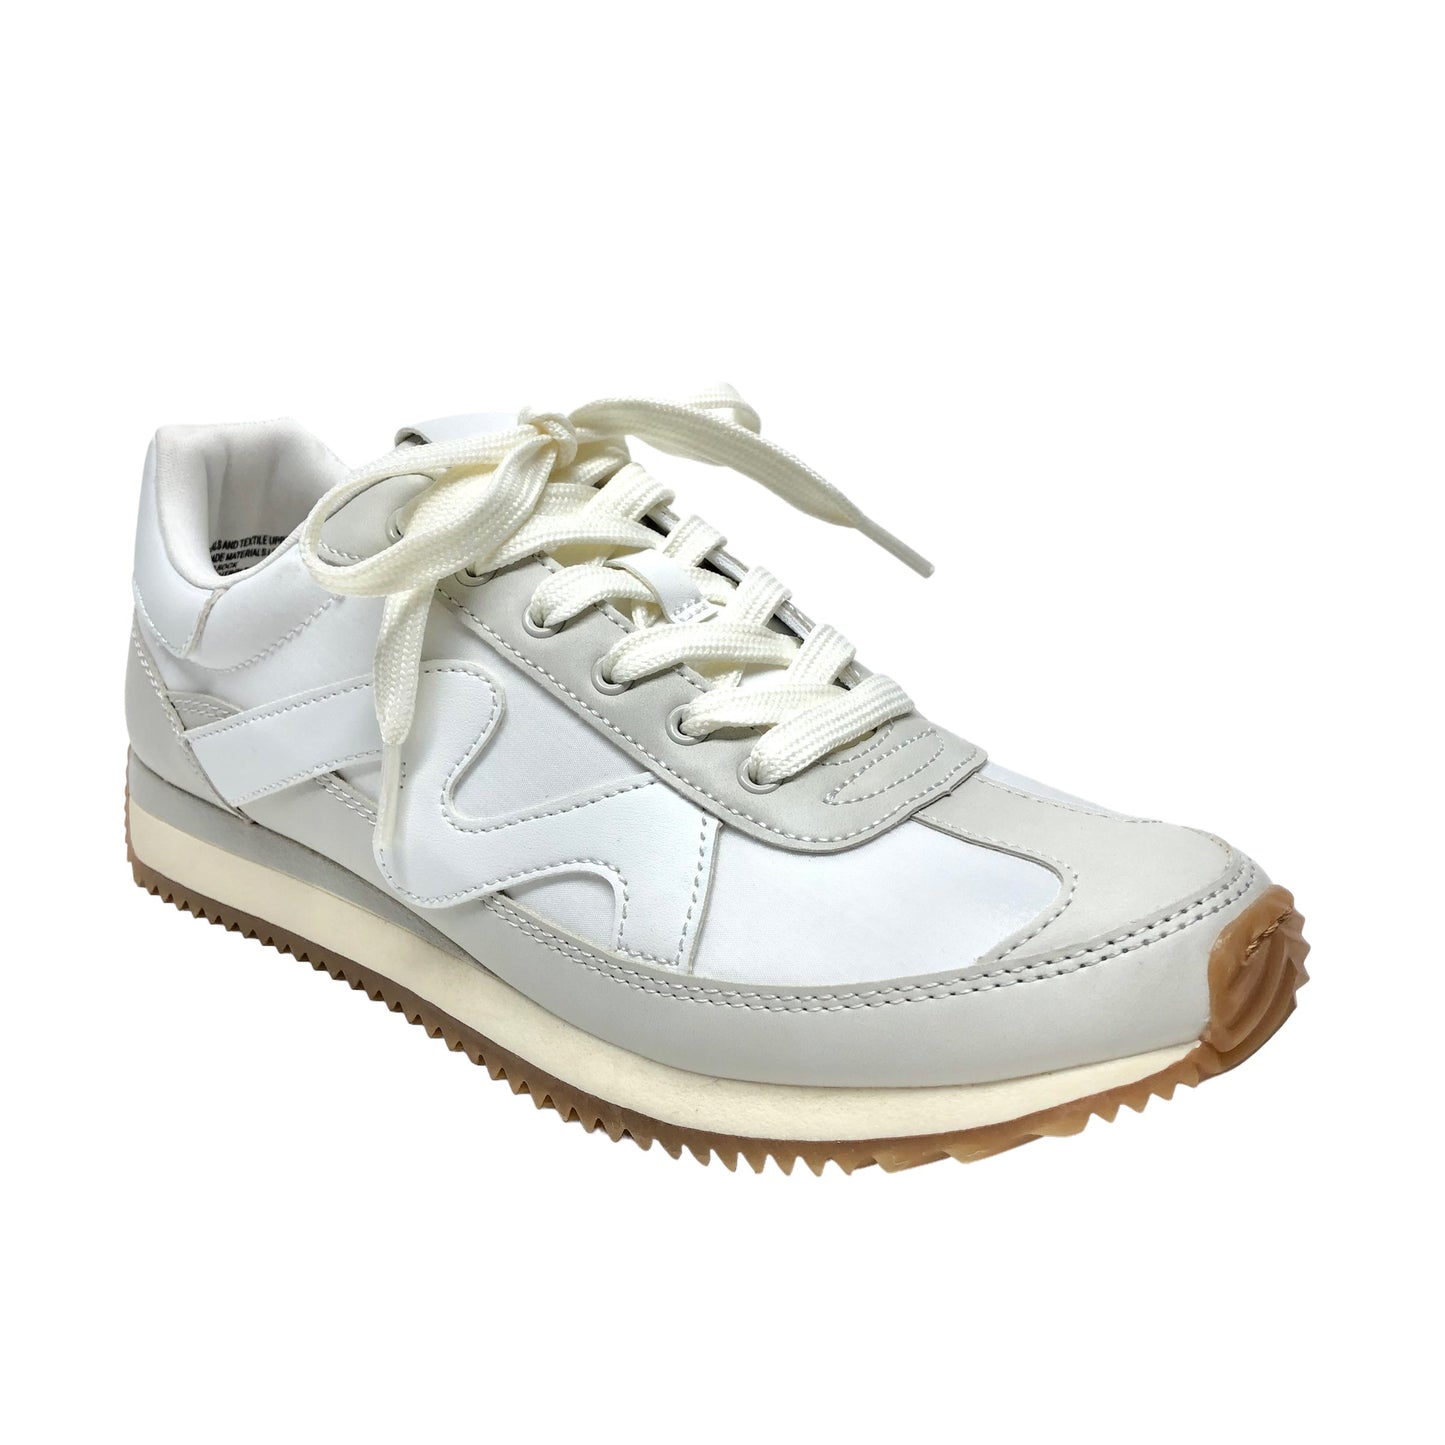 White Shoes Sneakers Universal Thread, Size 8